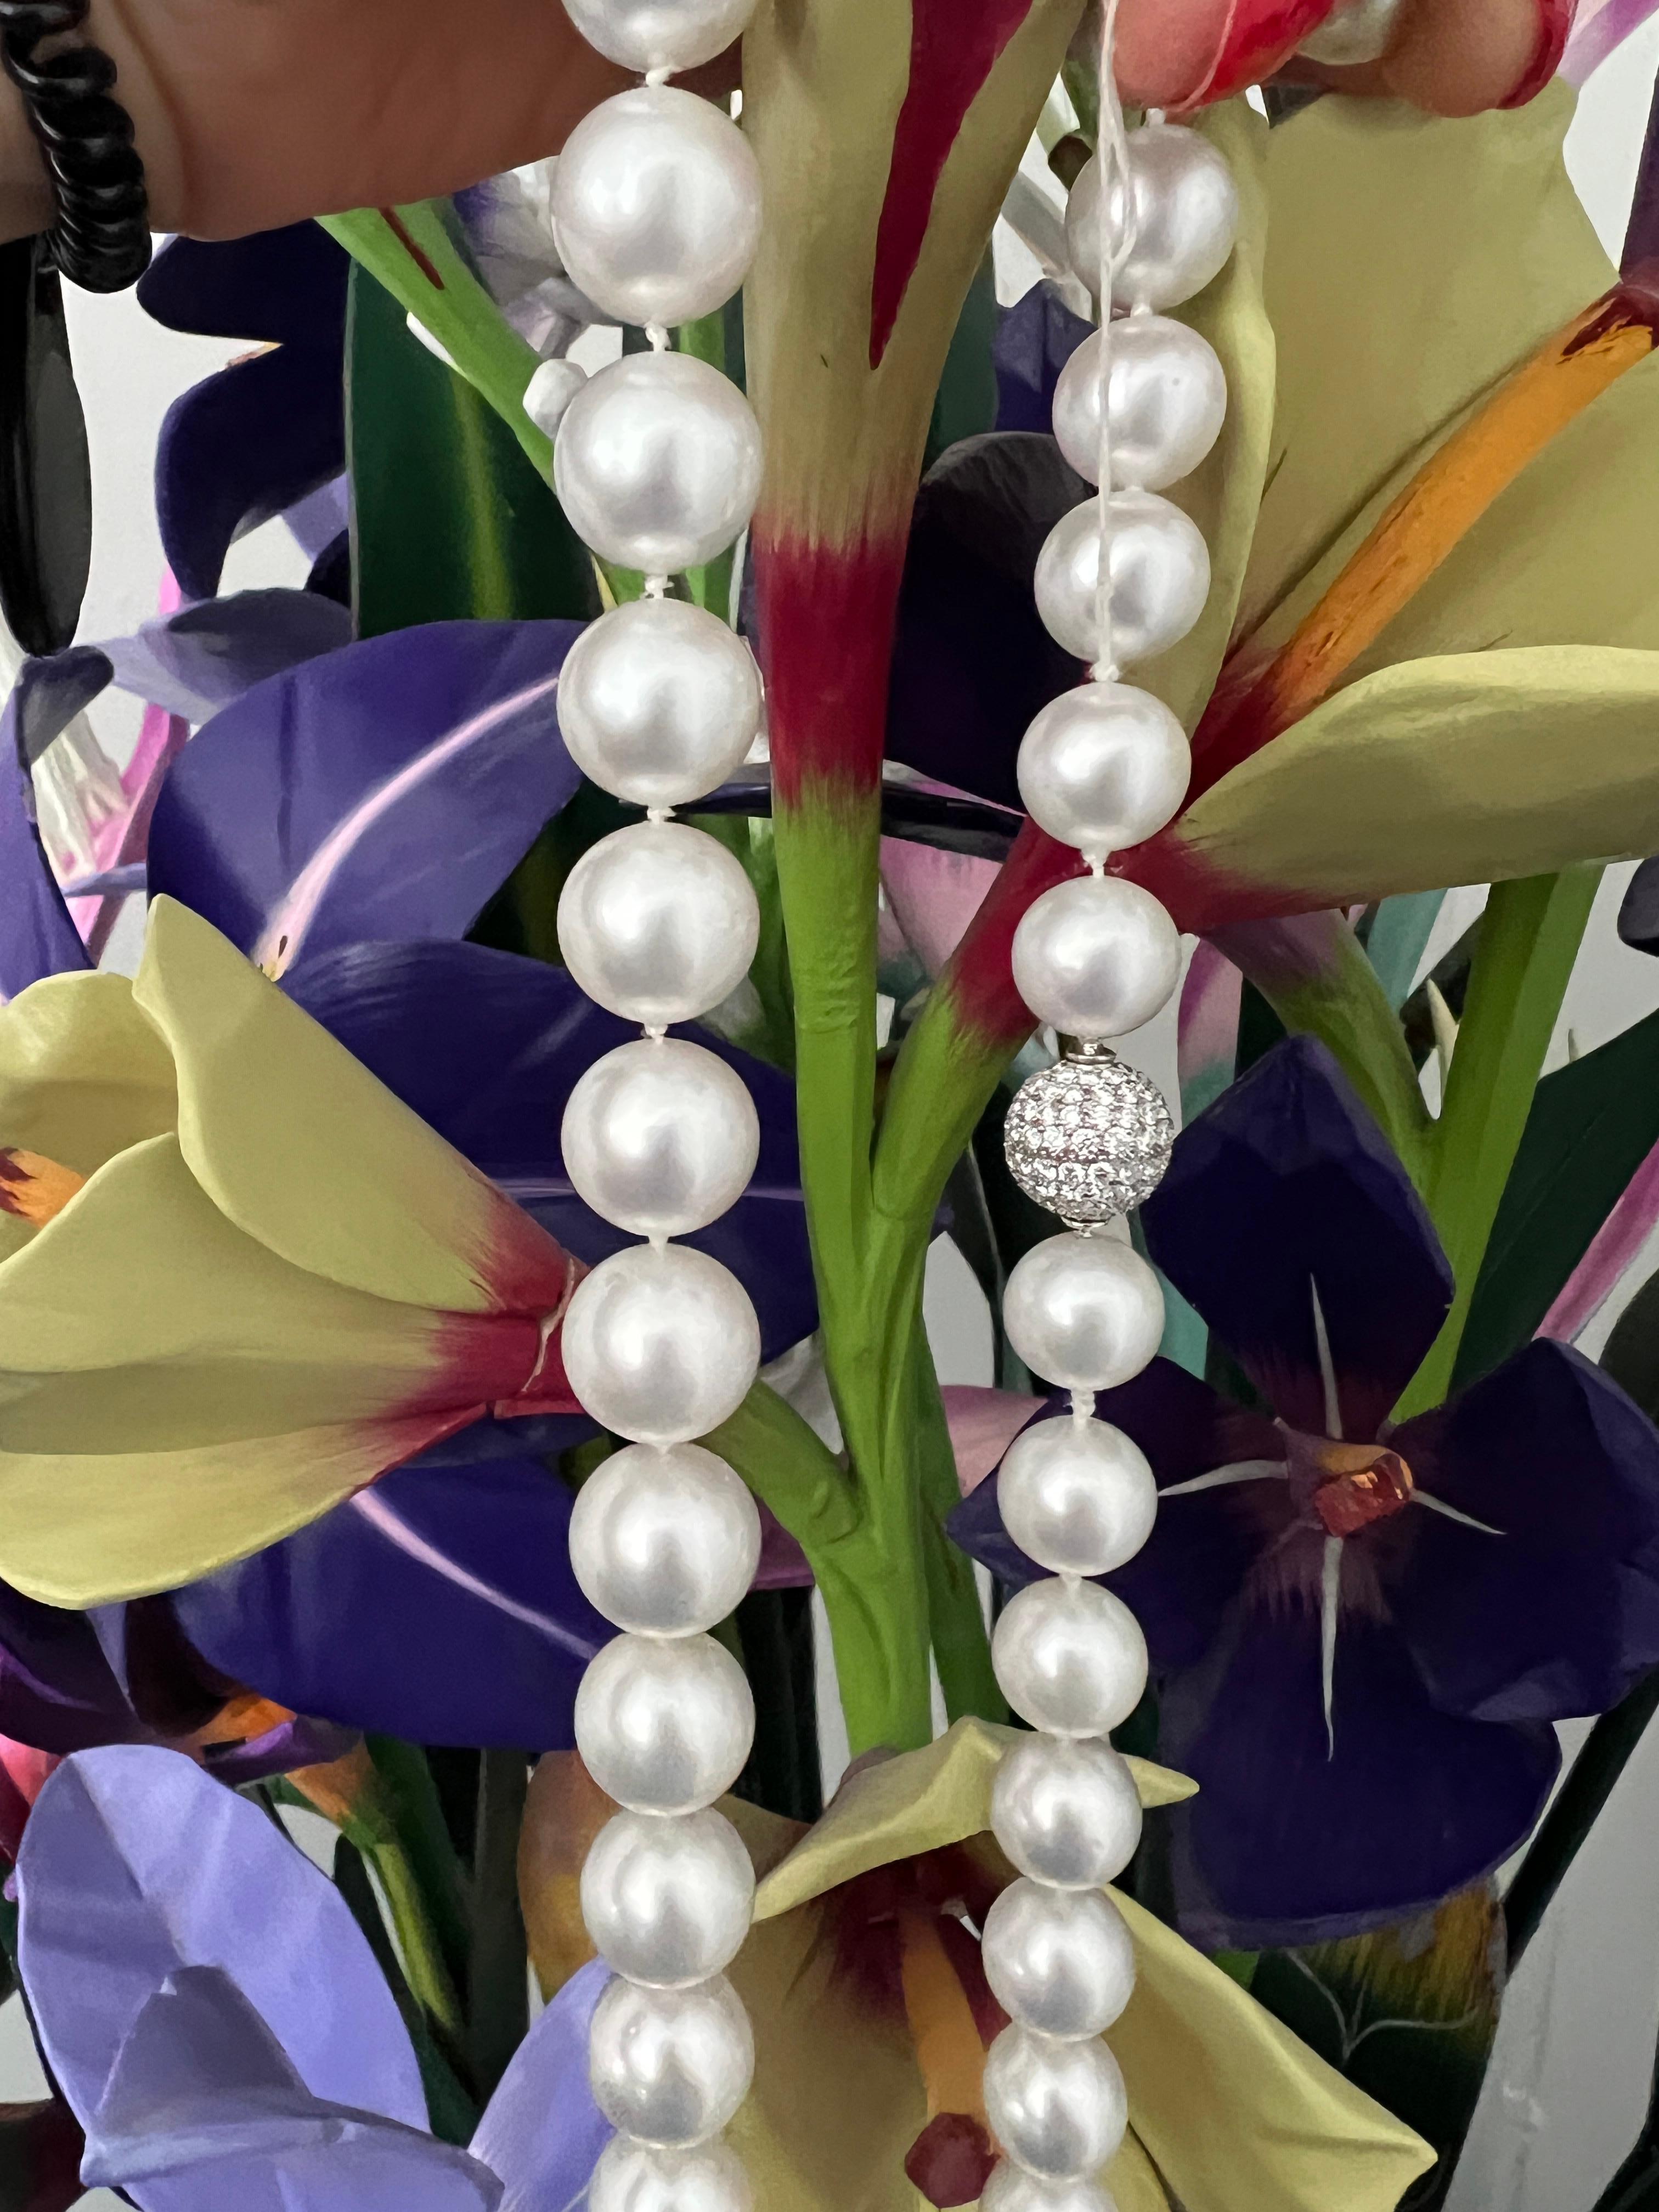 Graduated pearl necklace features 69 South Sea pearls ranging in size from 12.05mm to 14.75mm. The strand is completed with a 13mm platinum pave diamond clasp with 2.70 carats, G-H color, VS clarity

The pearls are 39 inches in length, allowing you